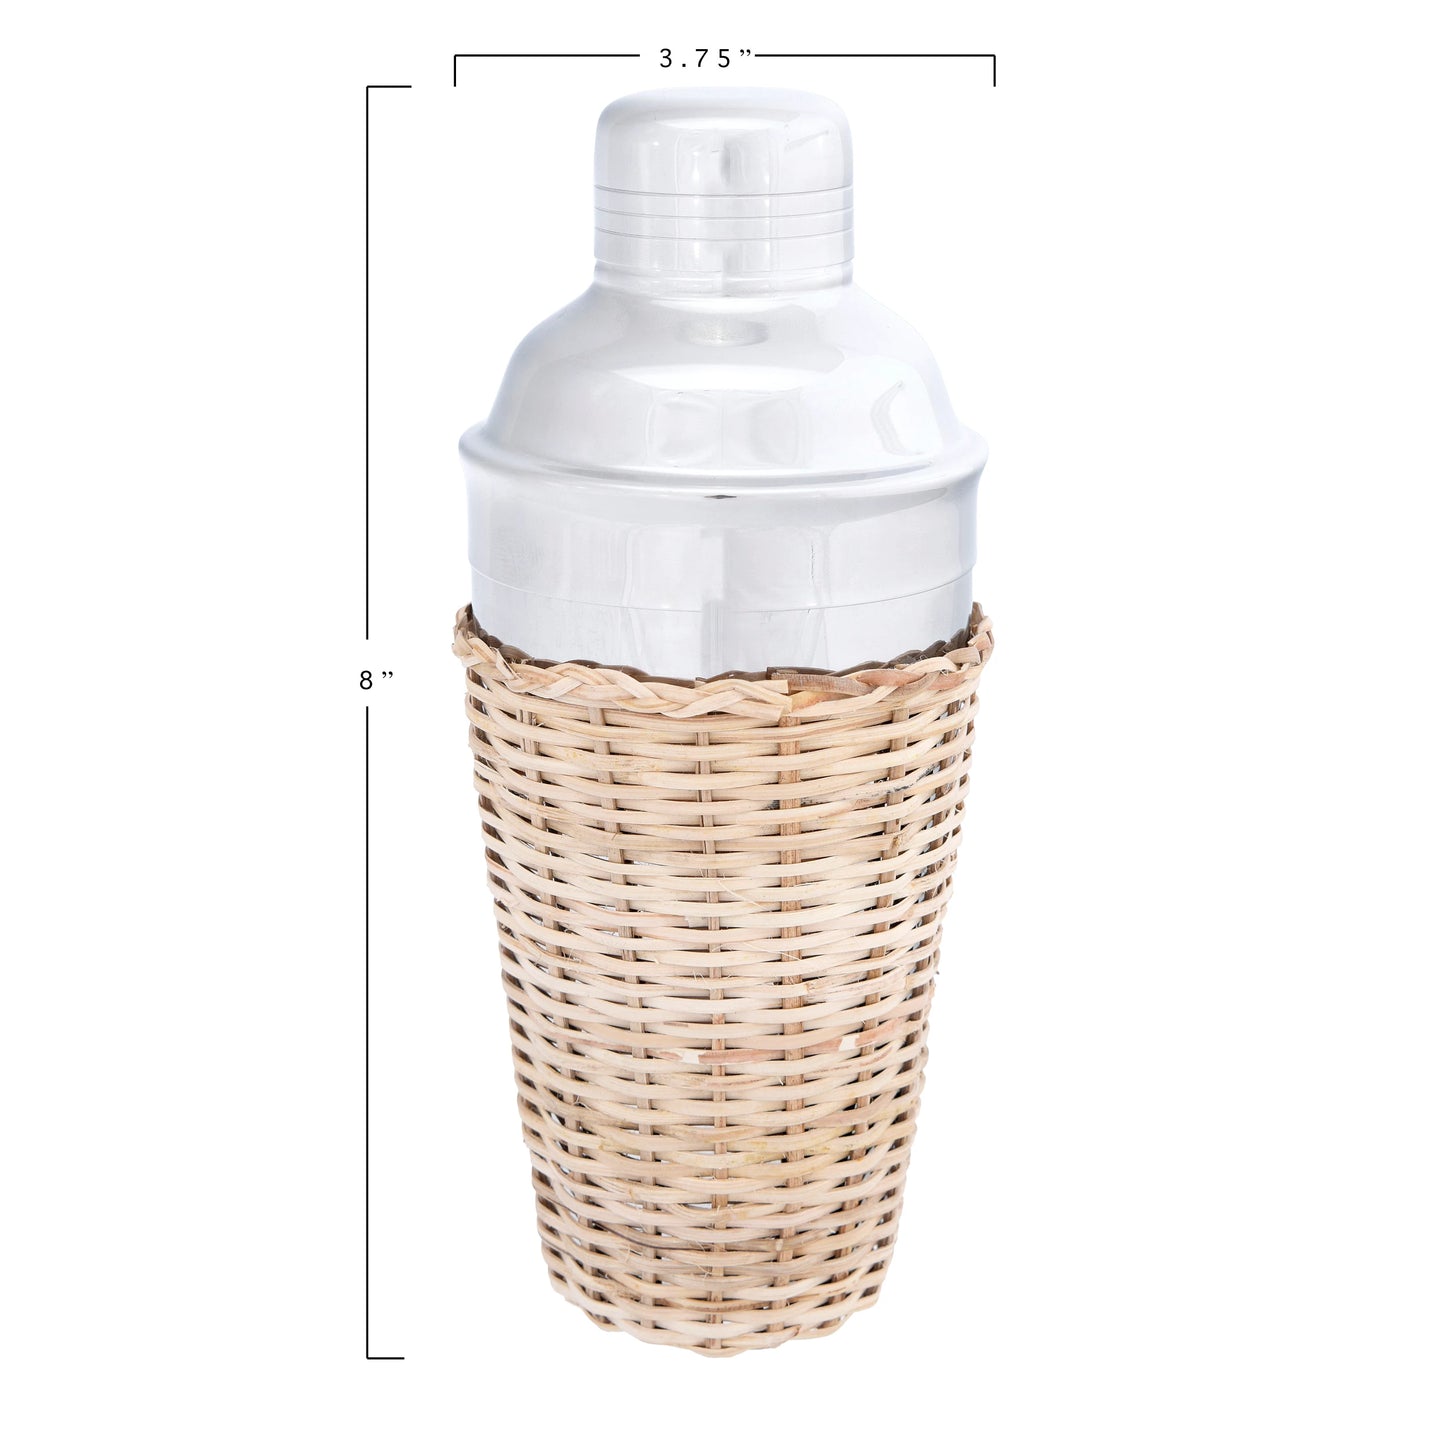 Stainless Steel + Rattan Cocktail Shaker